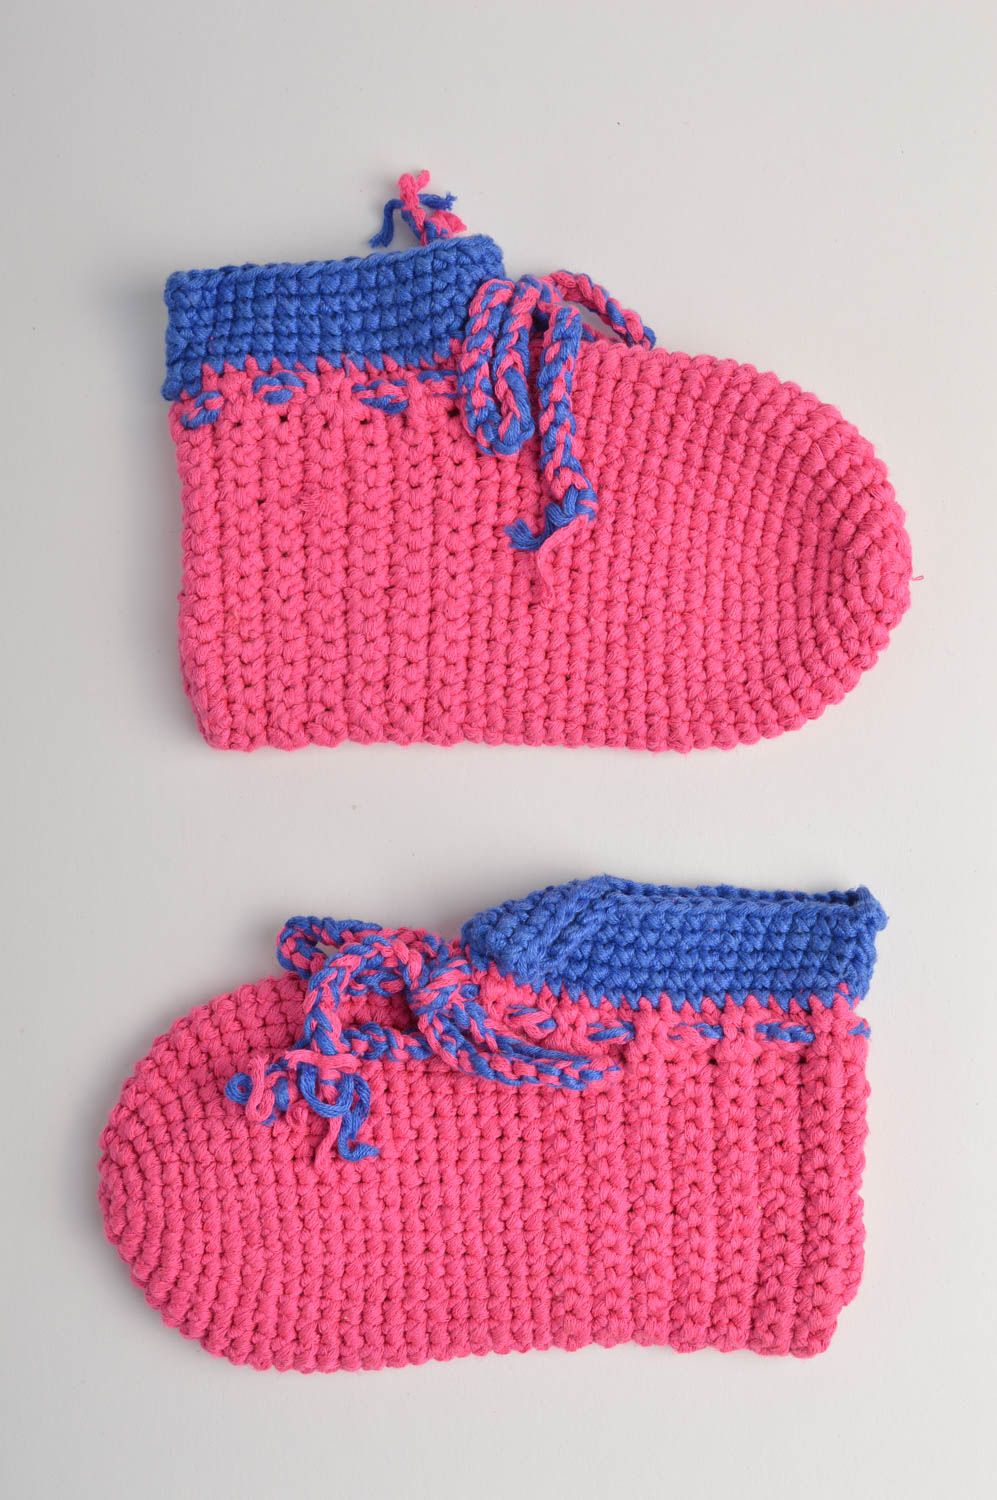 Handmade crochet baby booties goods for children baby shoes best gifts for kids photo 3